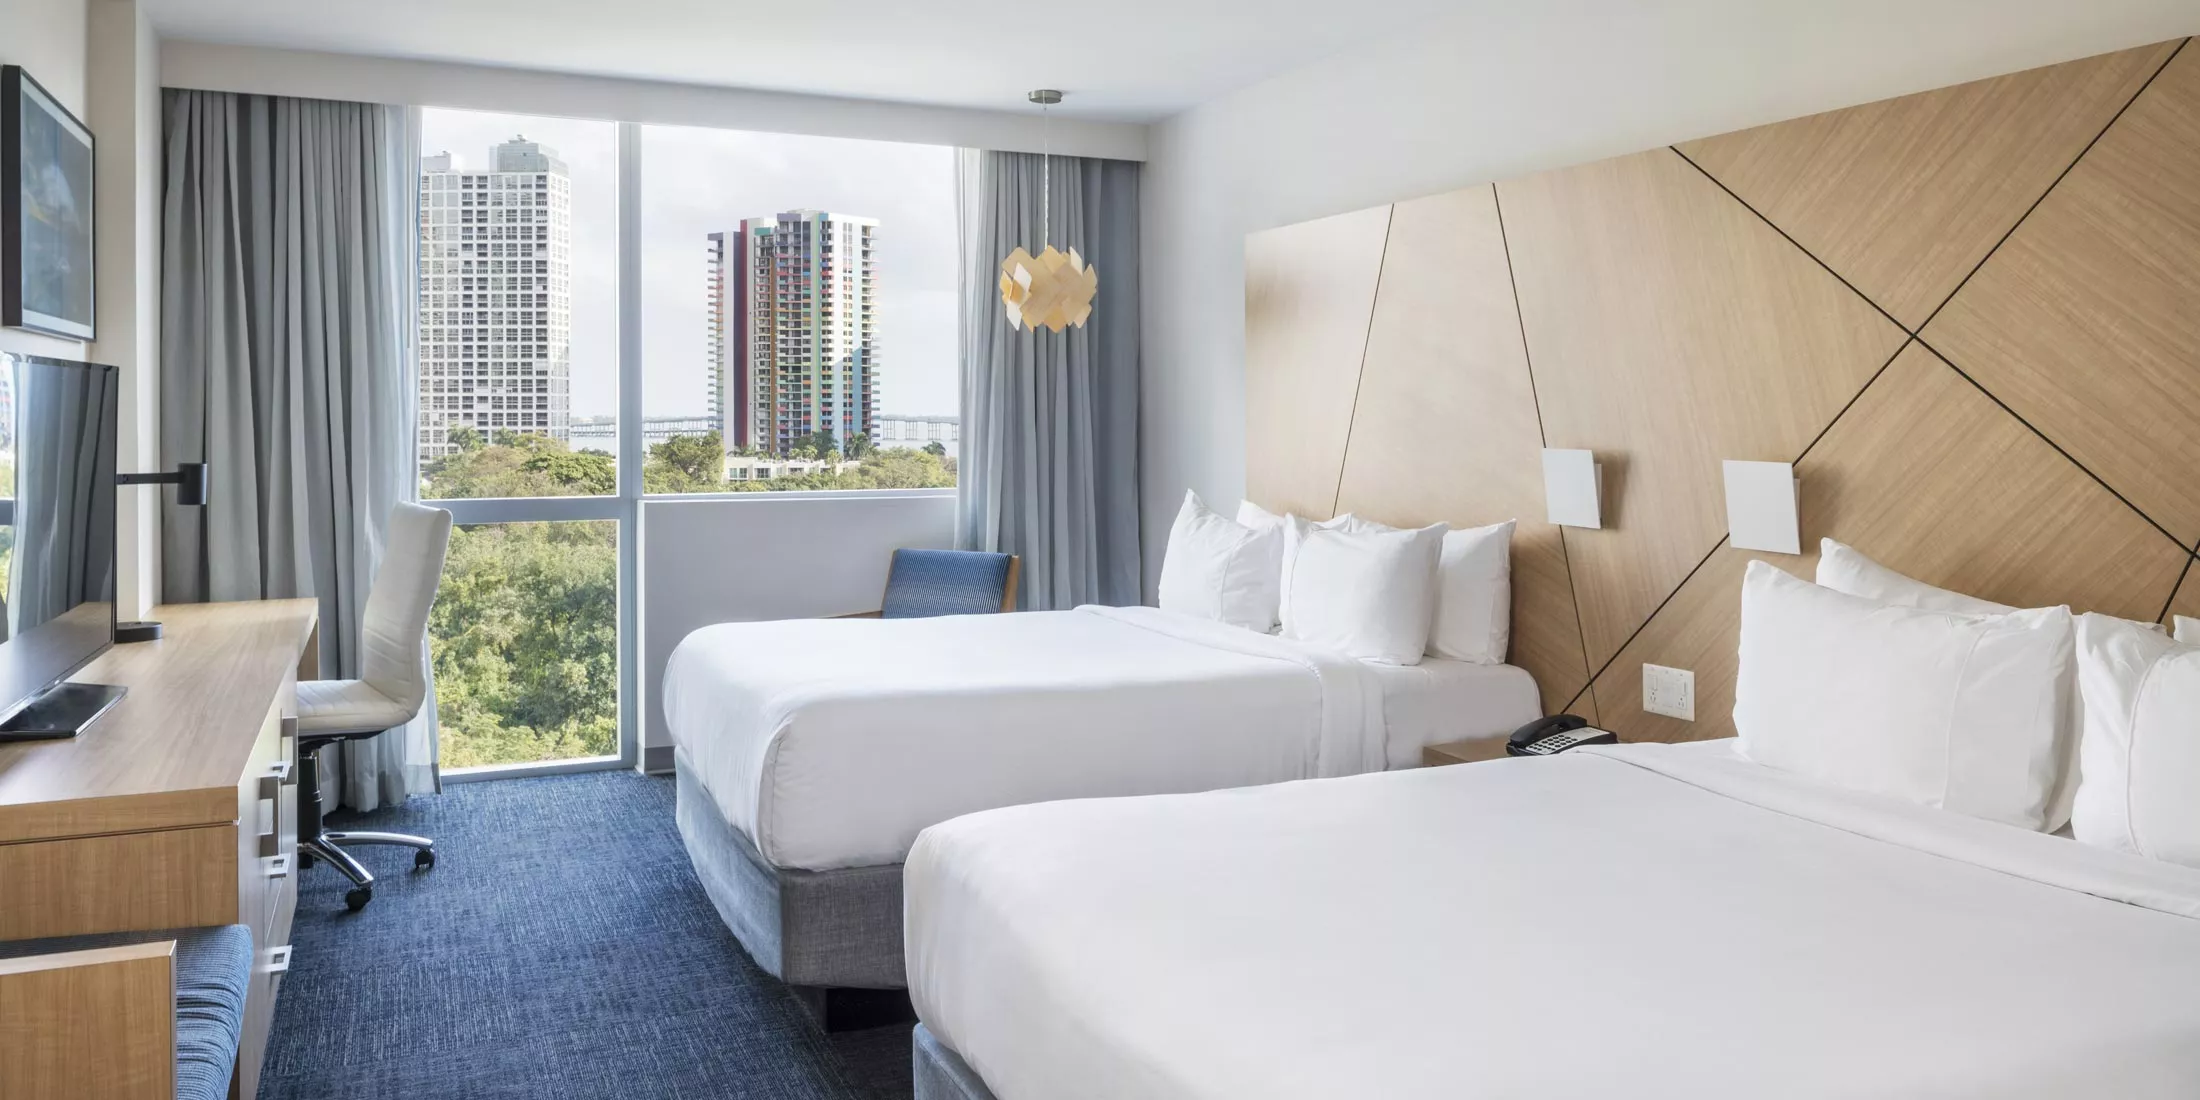 Image sourced from Novotel's website at: https://www.google.com/url?sa=i&url=https%3A%2F%2Fwww.novotelmiami.com%2Frooms%2Fsuperior-double-queen%2F&psig=AOvVaw2mD1iFqhUp95woOv8VFetW&ust=1669275824682000&source=images&cd=vfe&ved=0CBAQjRxqFwoTCLi2wpjnw_sCFQAAAAAdAAAAABAE